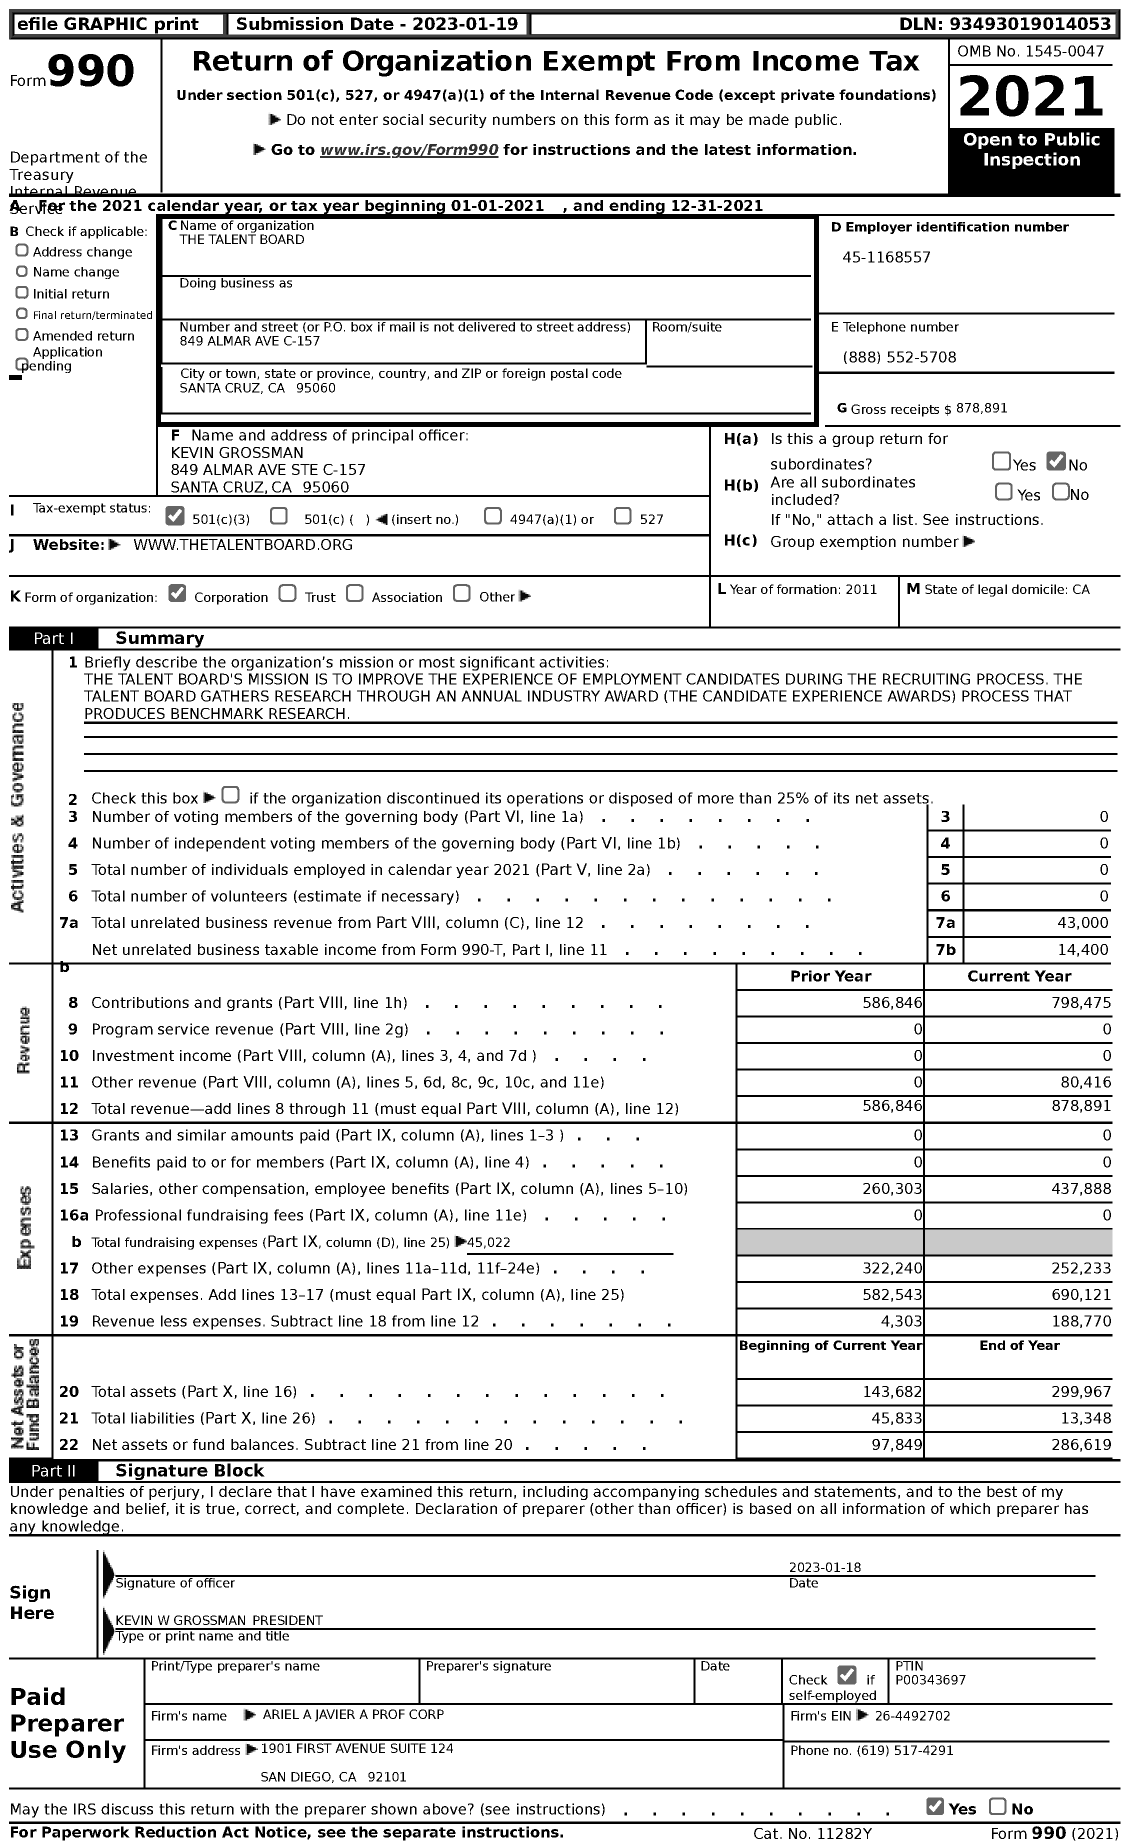 Image of first page of 2021 Form 990 for The Talent Board